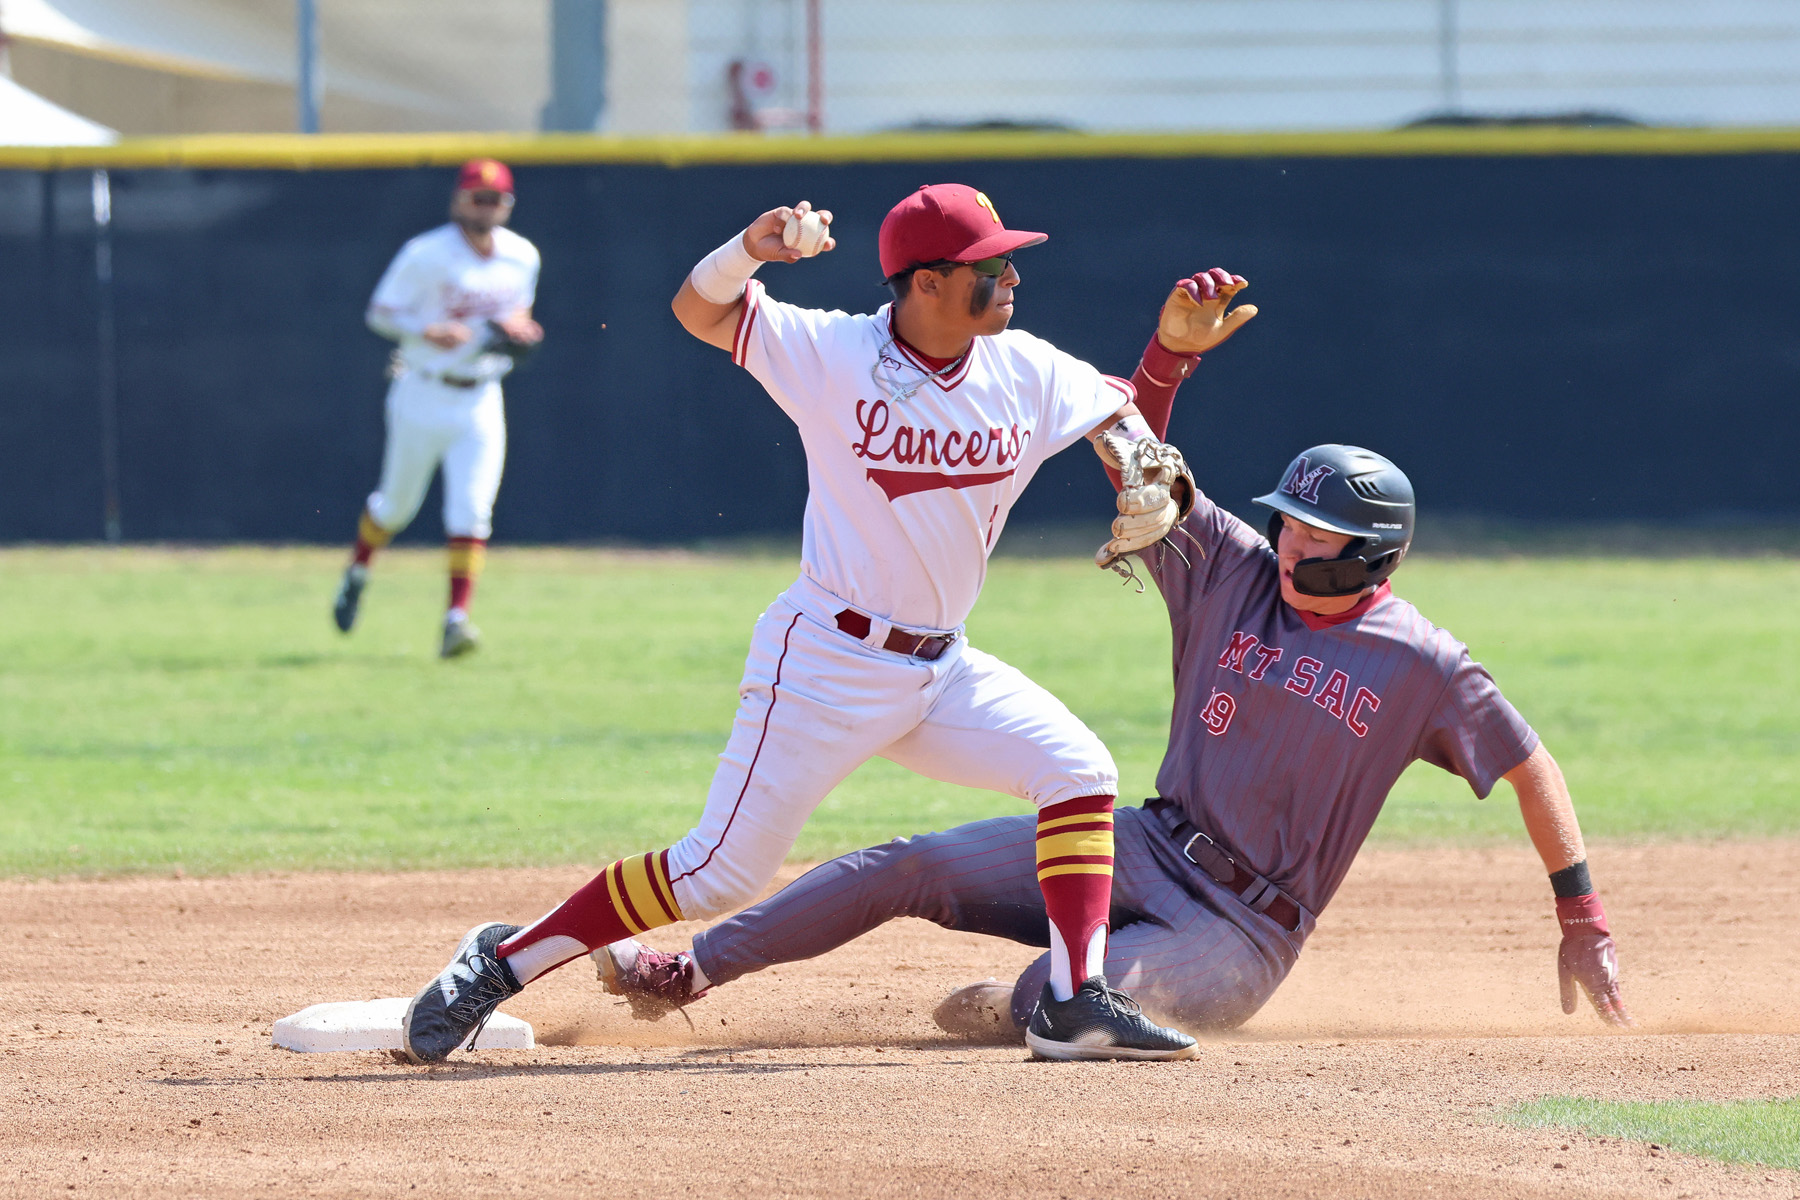 Ivan Barragan turns a double play in Thursday's win (photo by Richard Quinton).